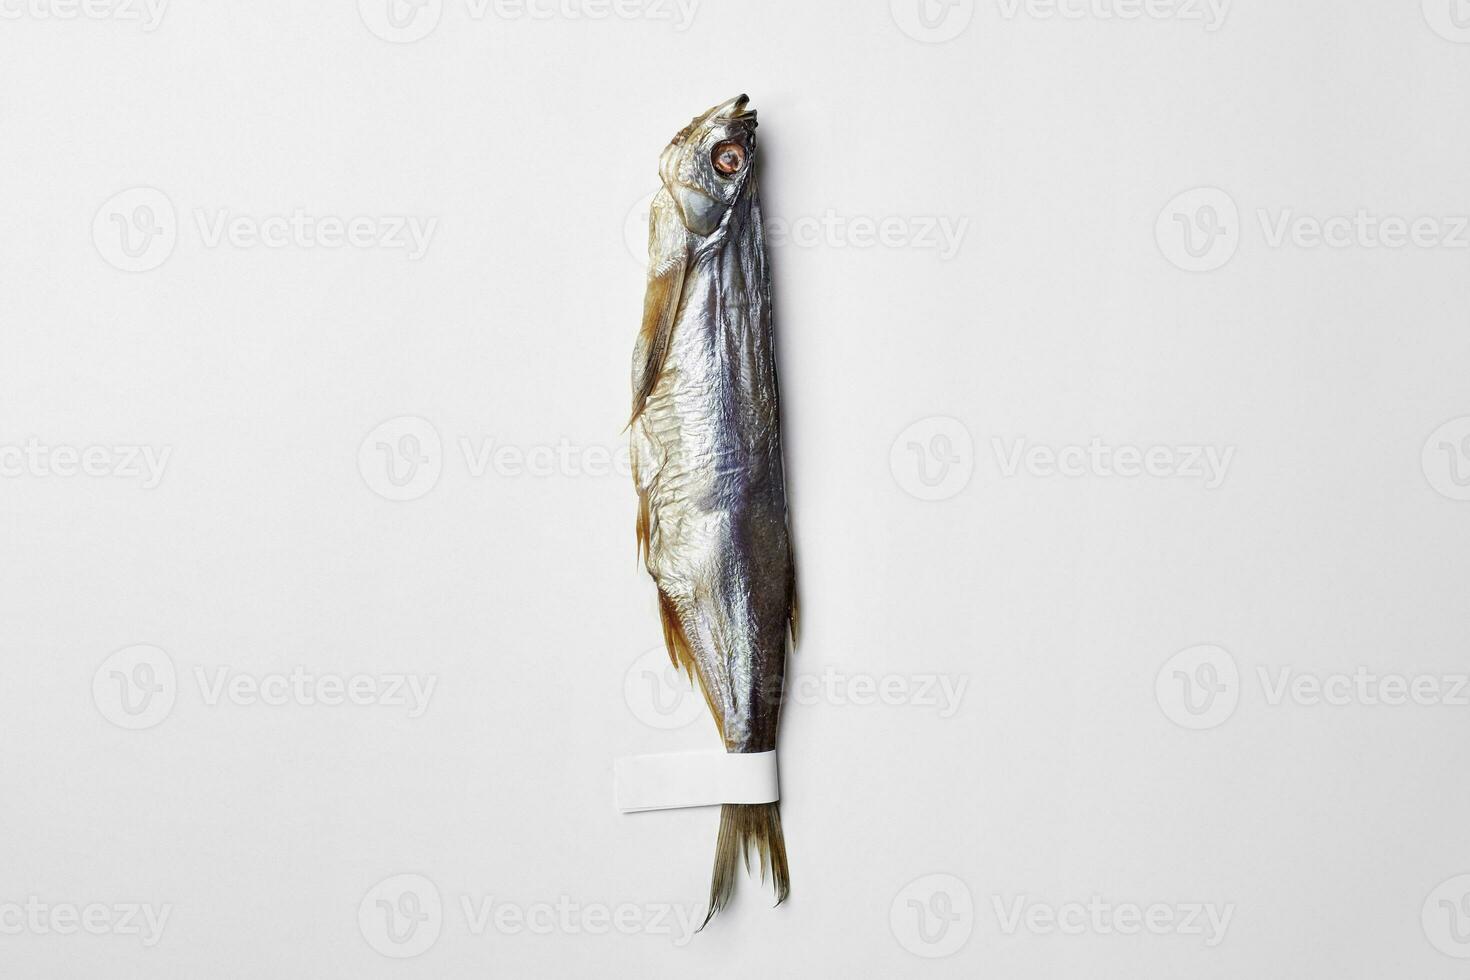 Salted air-dried sabrefish with paper label on tail isolated on white photo